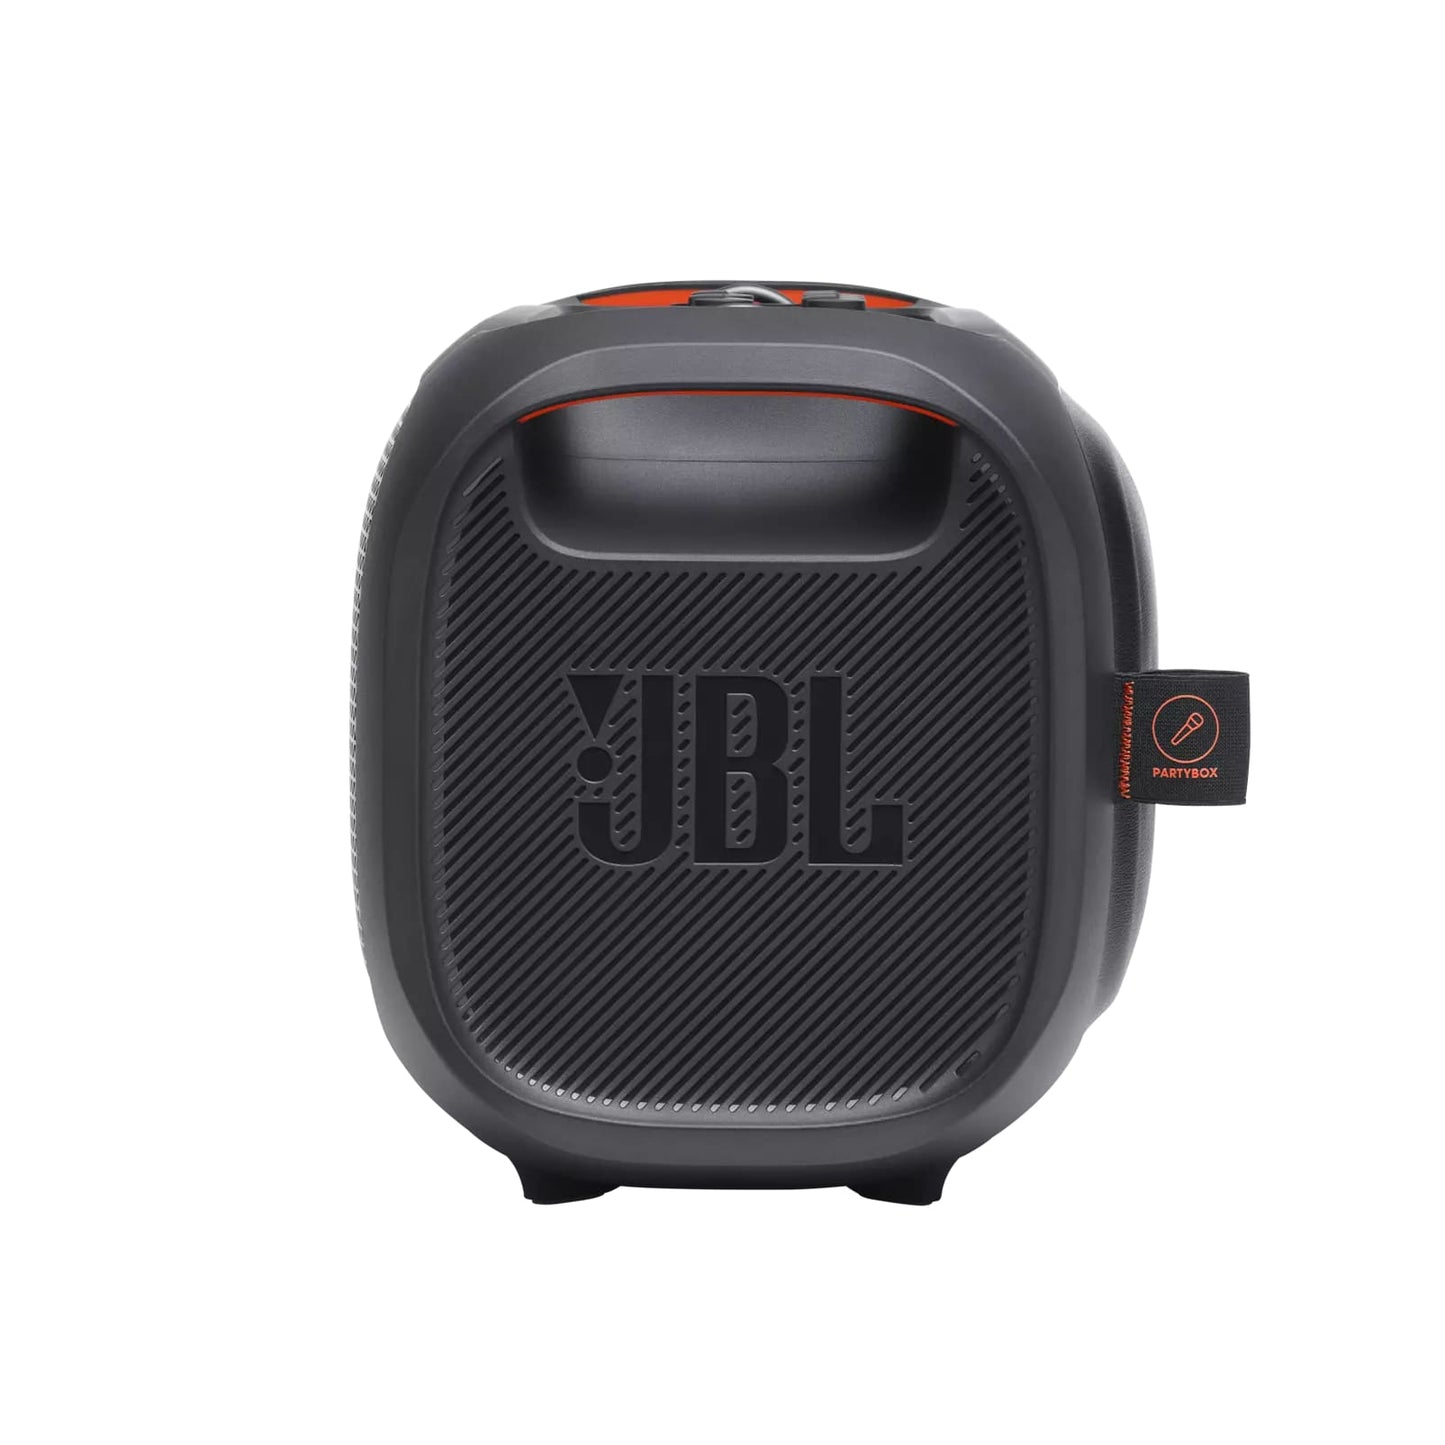 JBL PartyBox On-The-Go Portable Bluetooth Speaker System with IPX5 Water Resistant, Handheld Wireless Microphone with Max 10M Range, 6Hr Playtime and Built-In Shoulder Straps for Outdoor Travel and Events